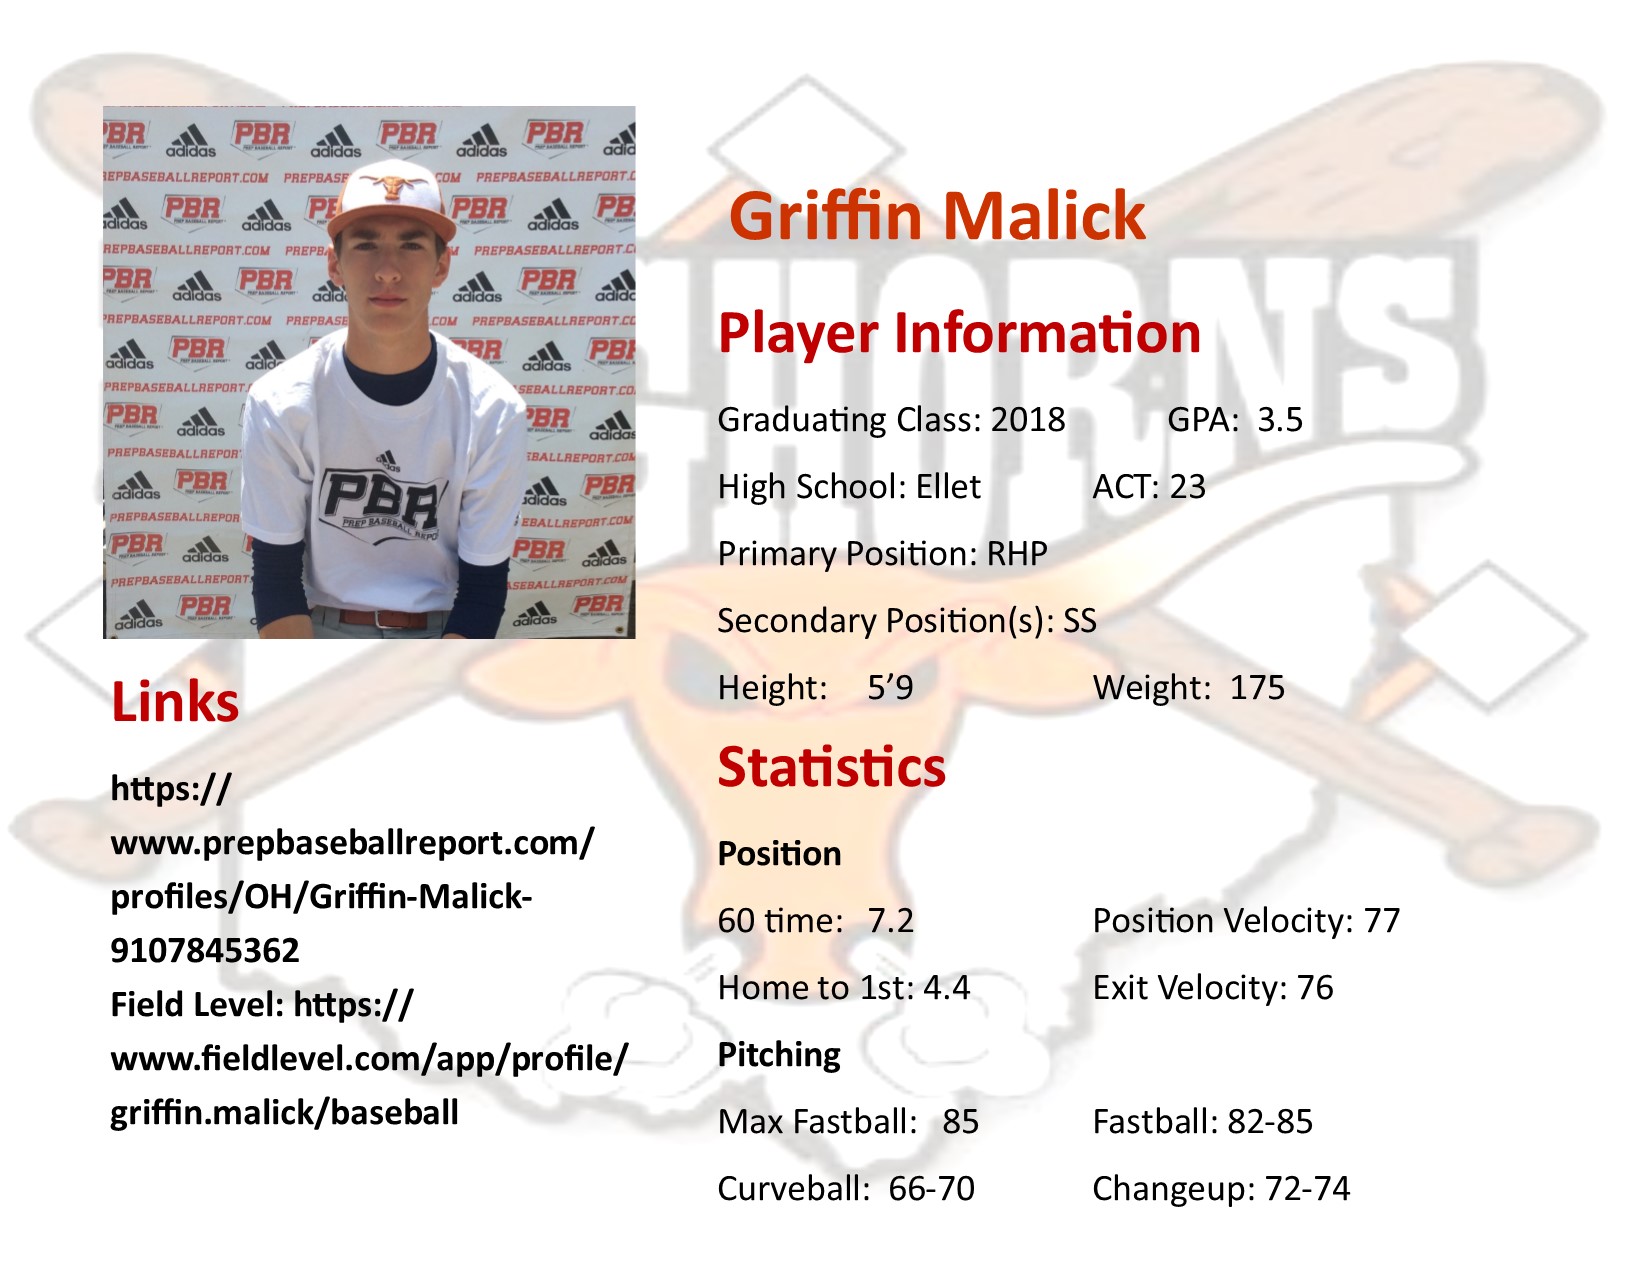 Griffin Malick